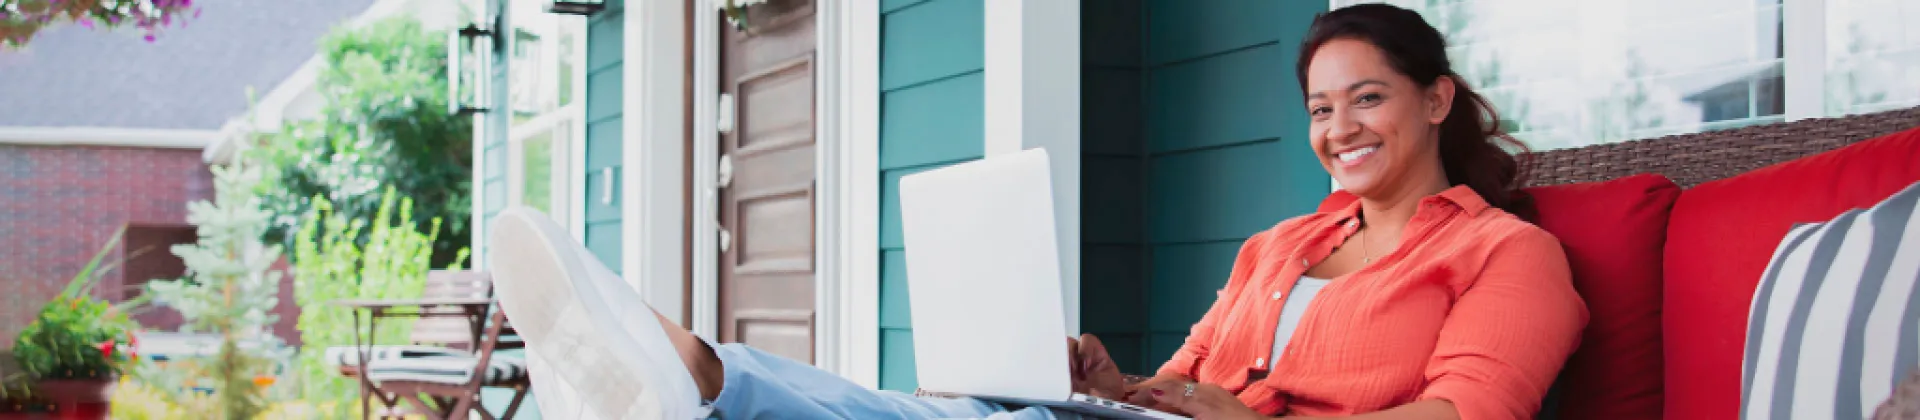 Person sitting on porch with laptop computer